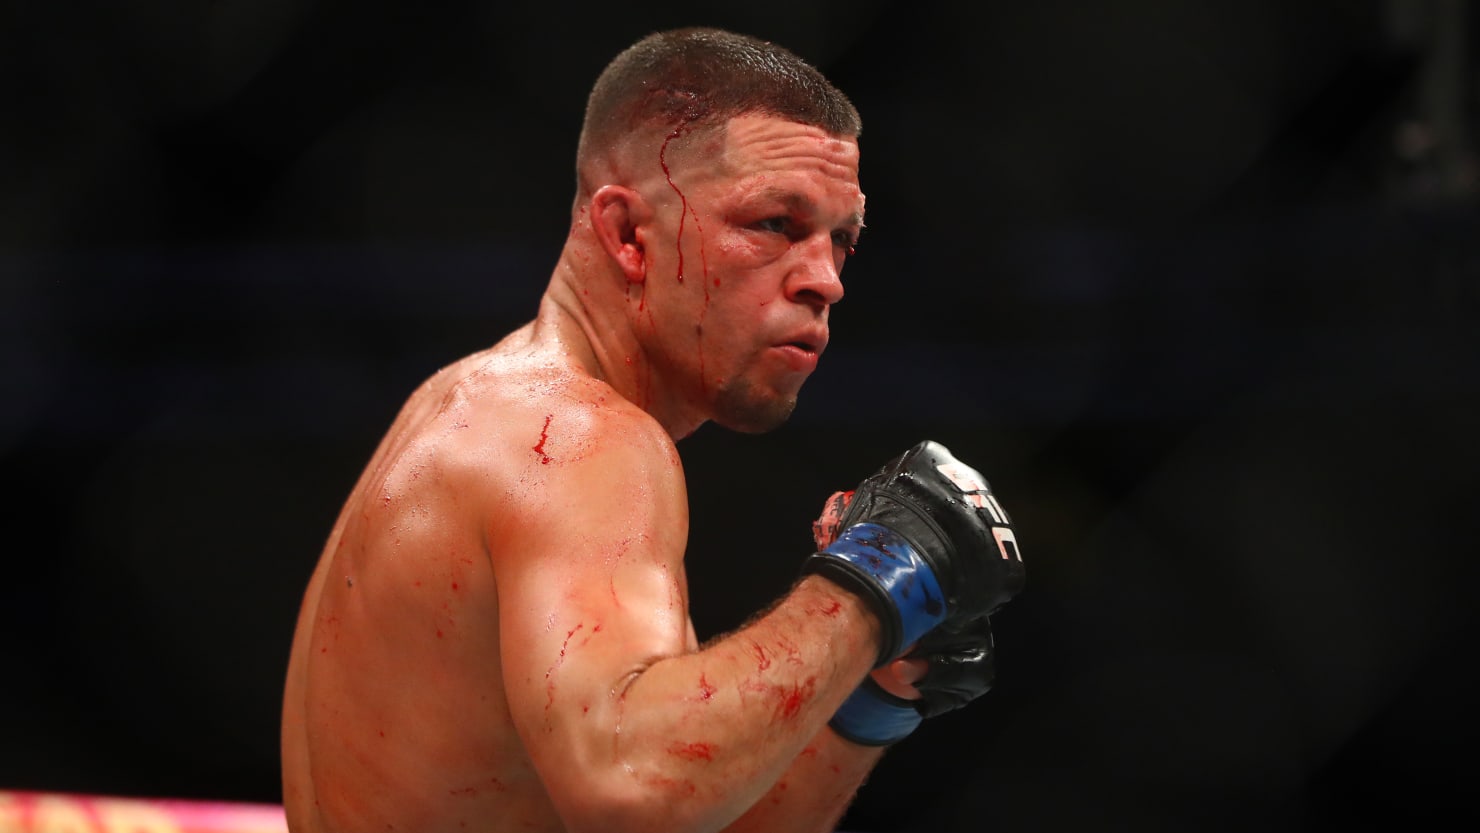 Ex-UFC Star Nate Diaz Turns Himself in After New Orleans Street Brawl